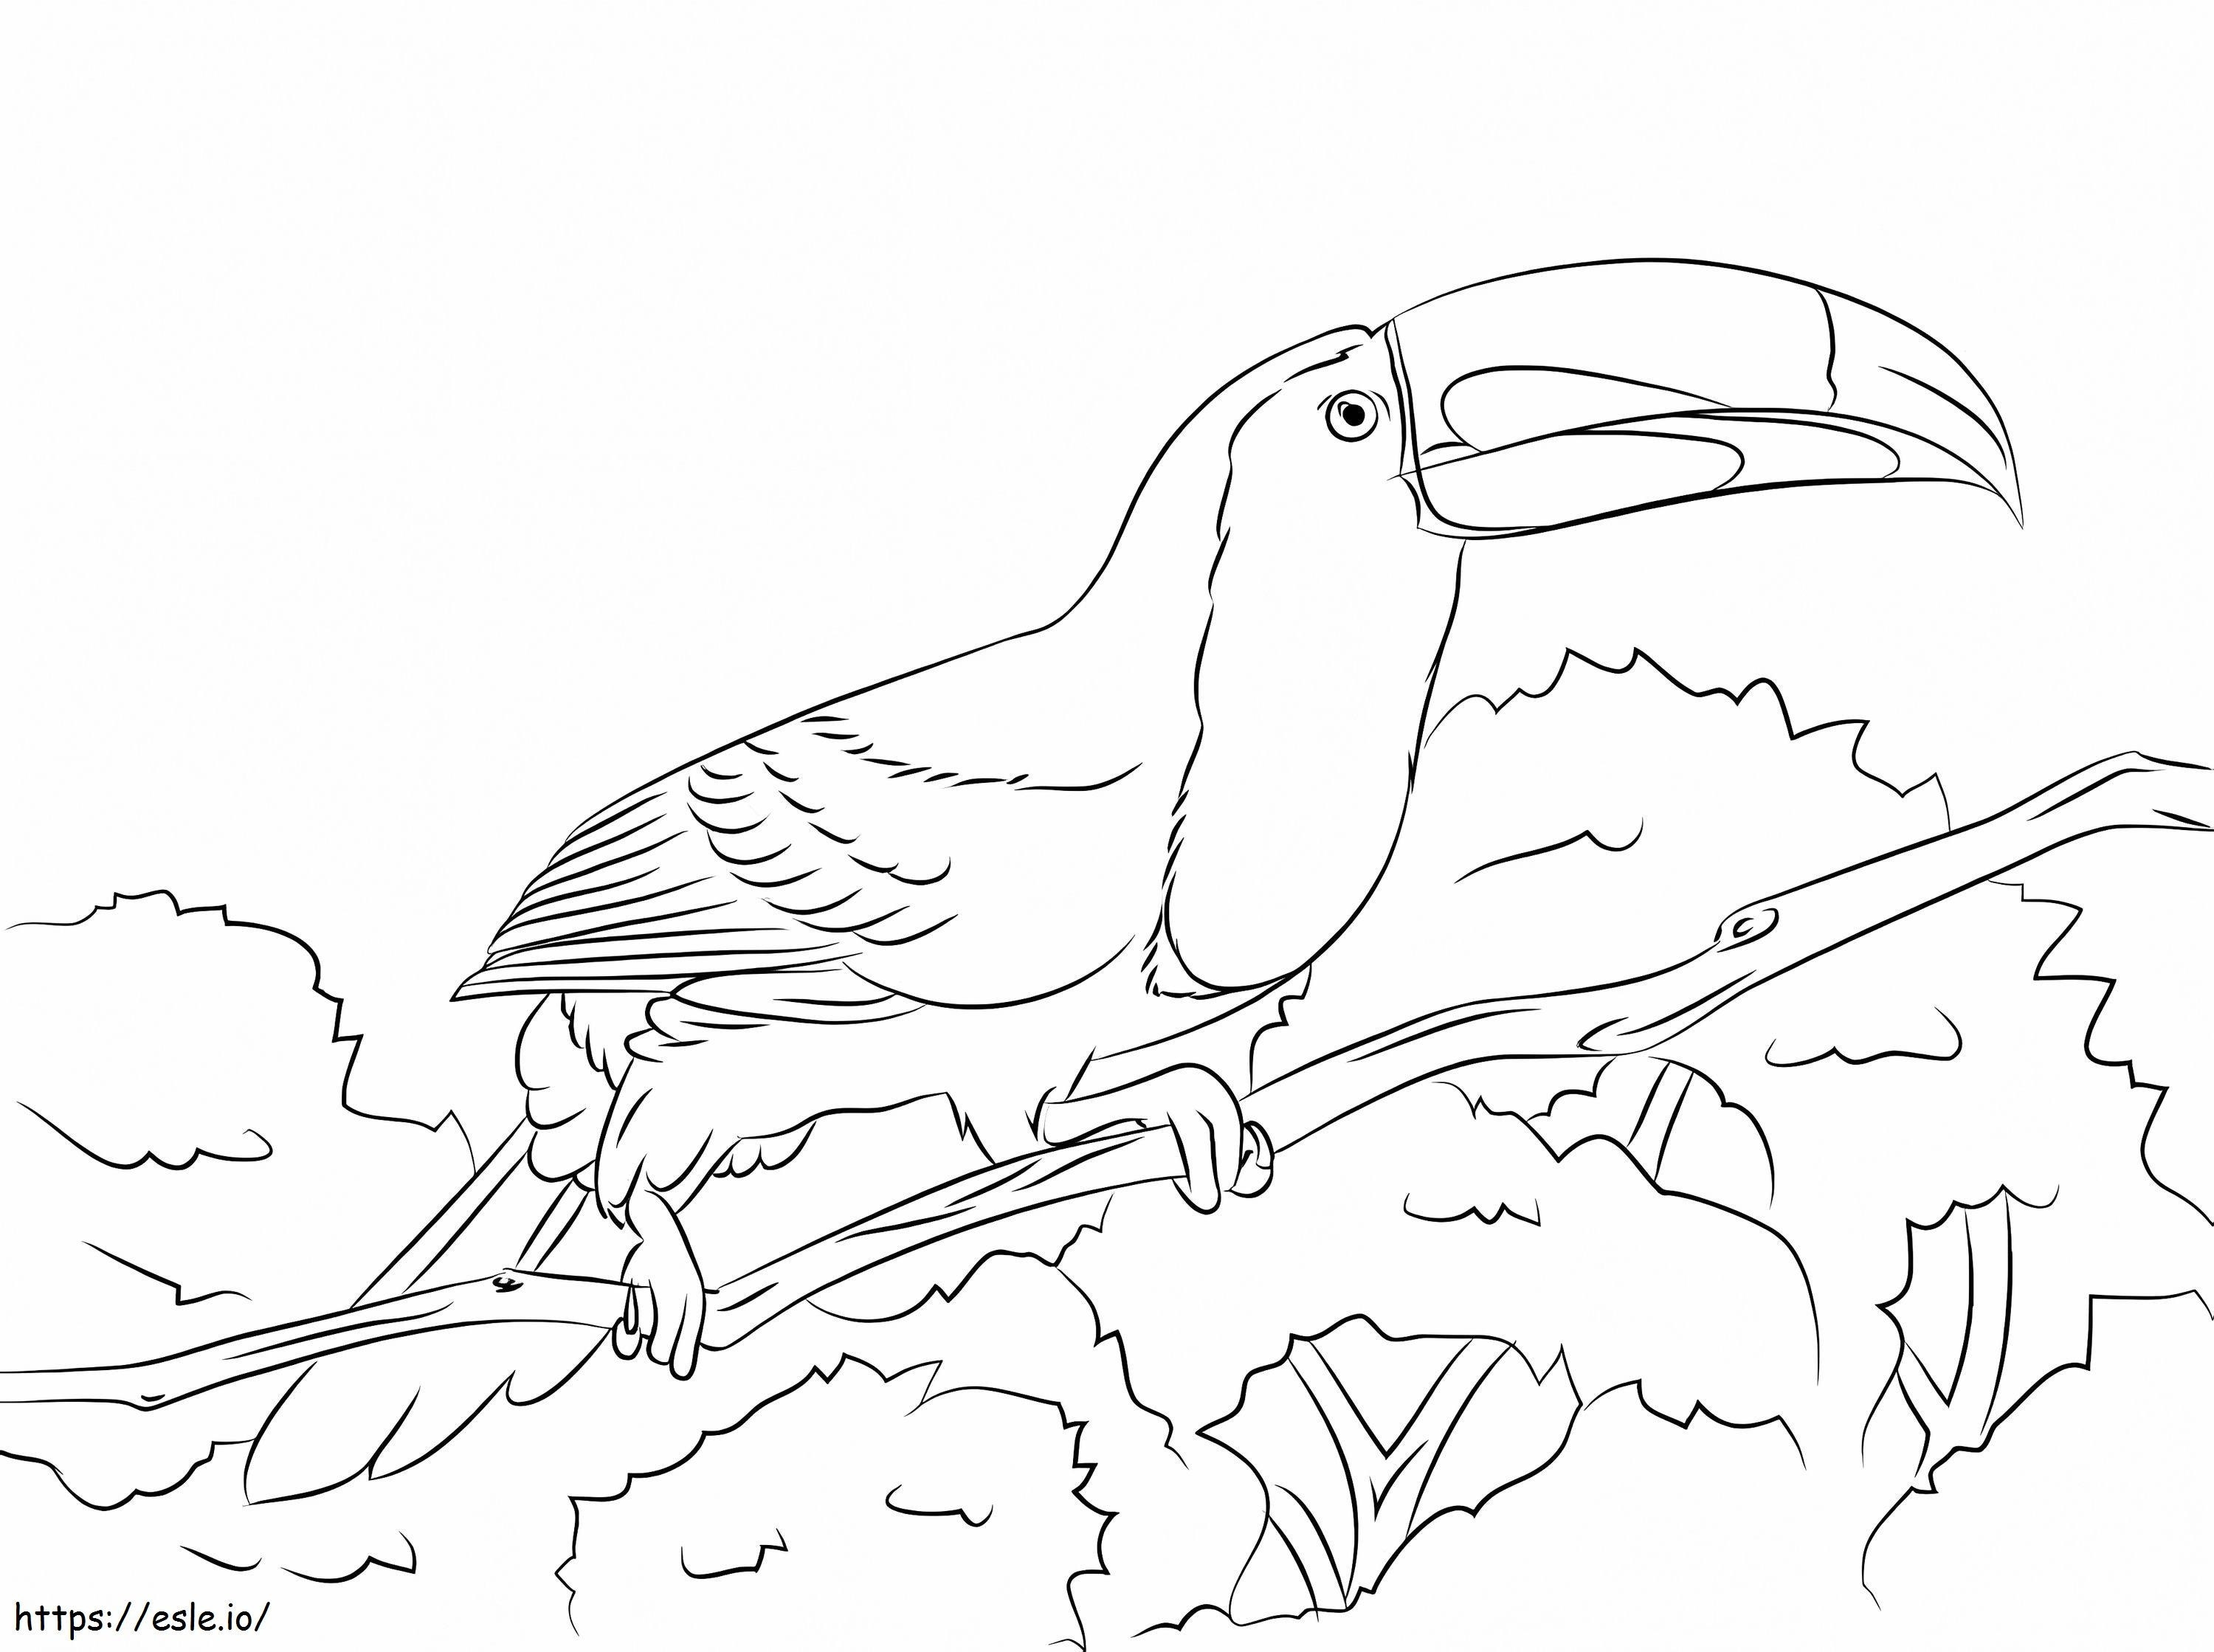 Keel-Billed Toucan Perched coloring page